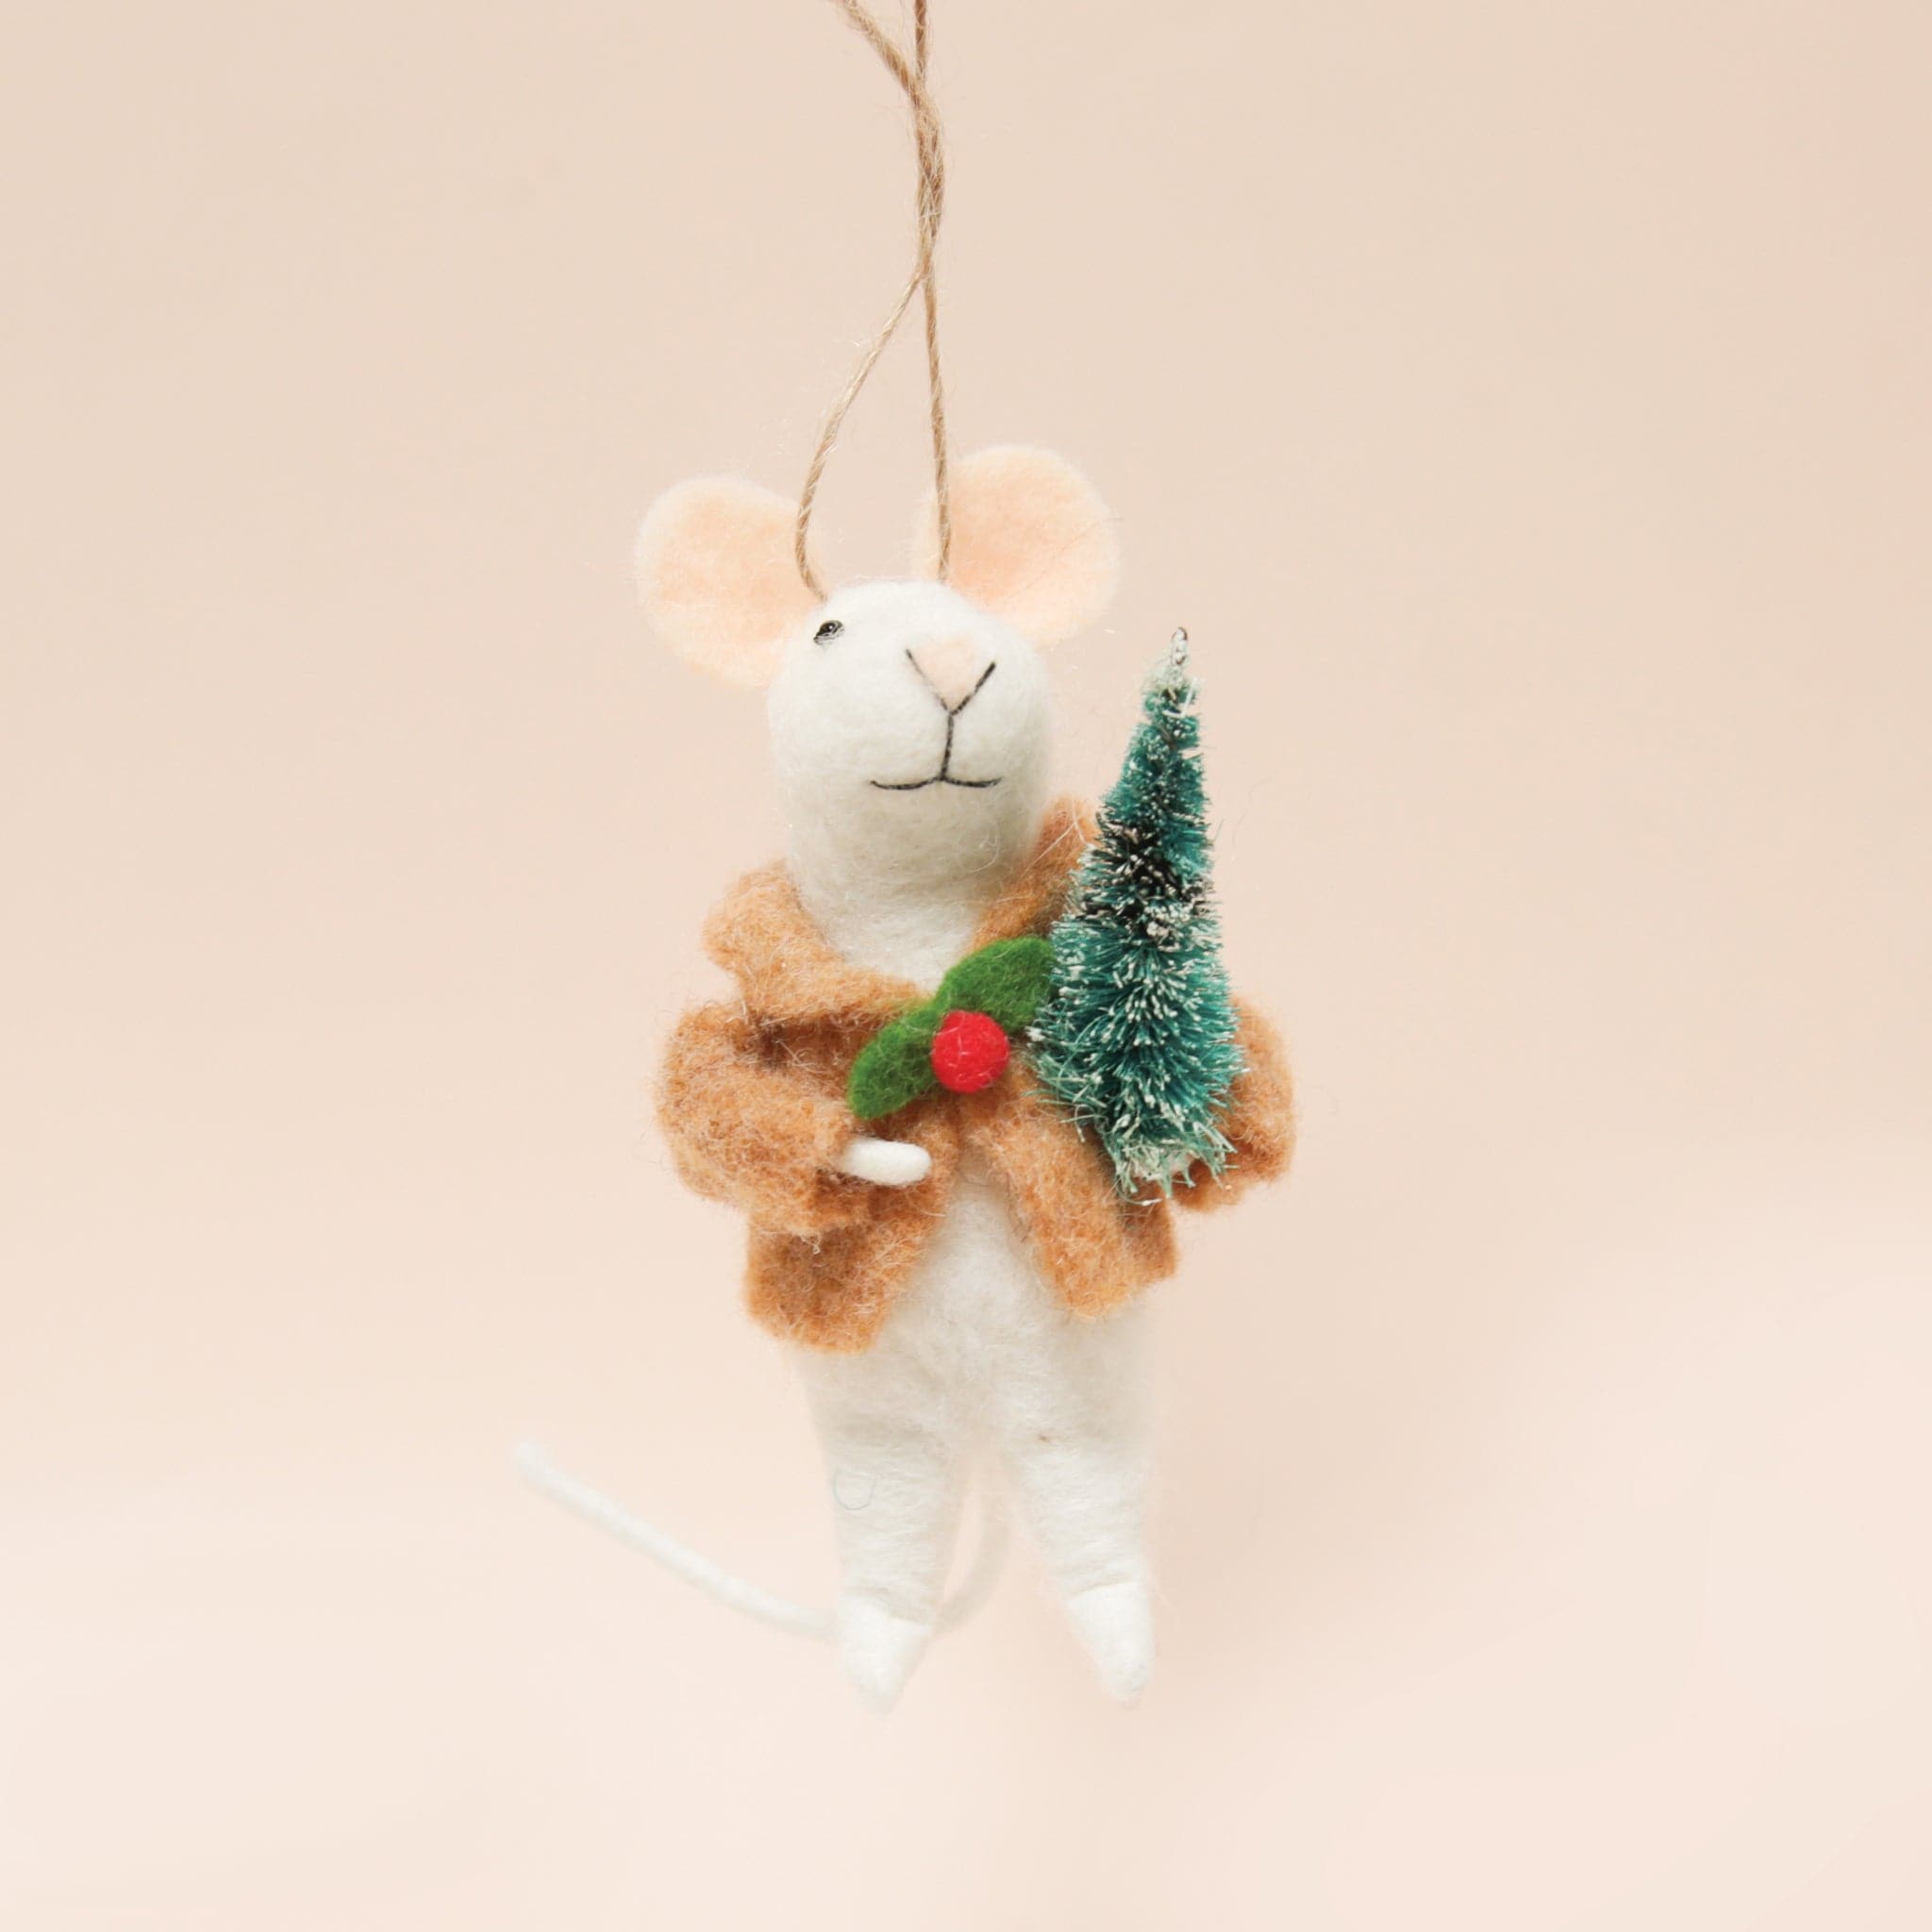 A white felt mouse ornament with a tan jacket on that has holly as the button and holding a small green bristle tree.